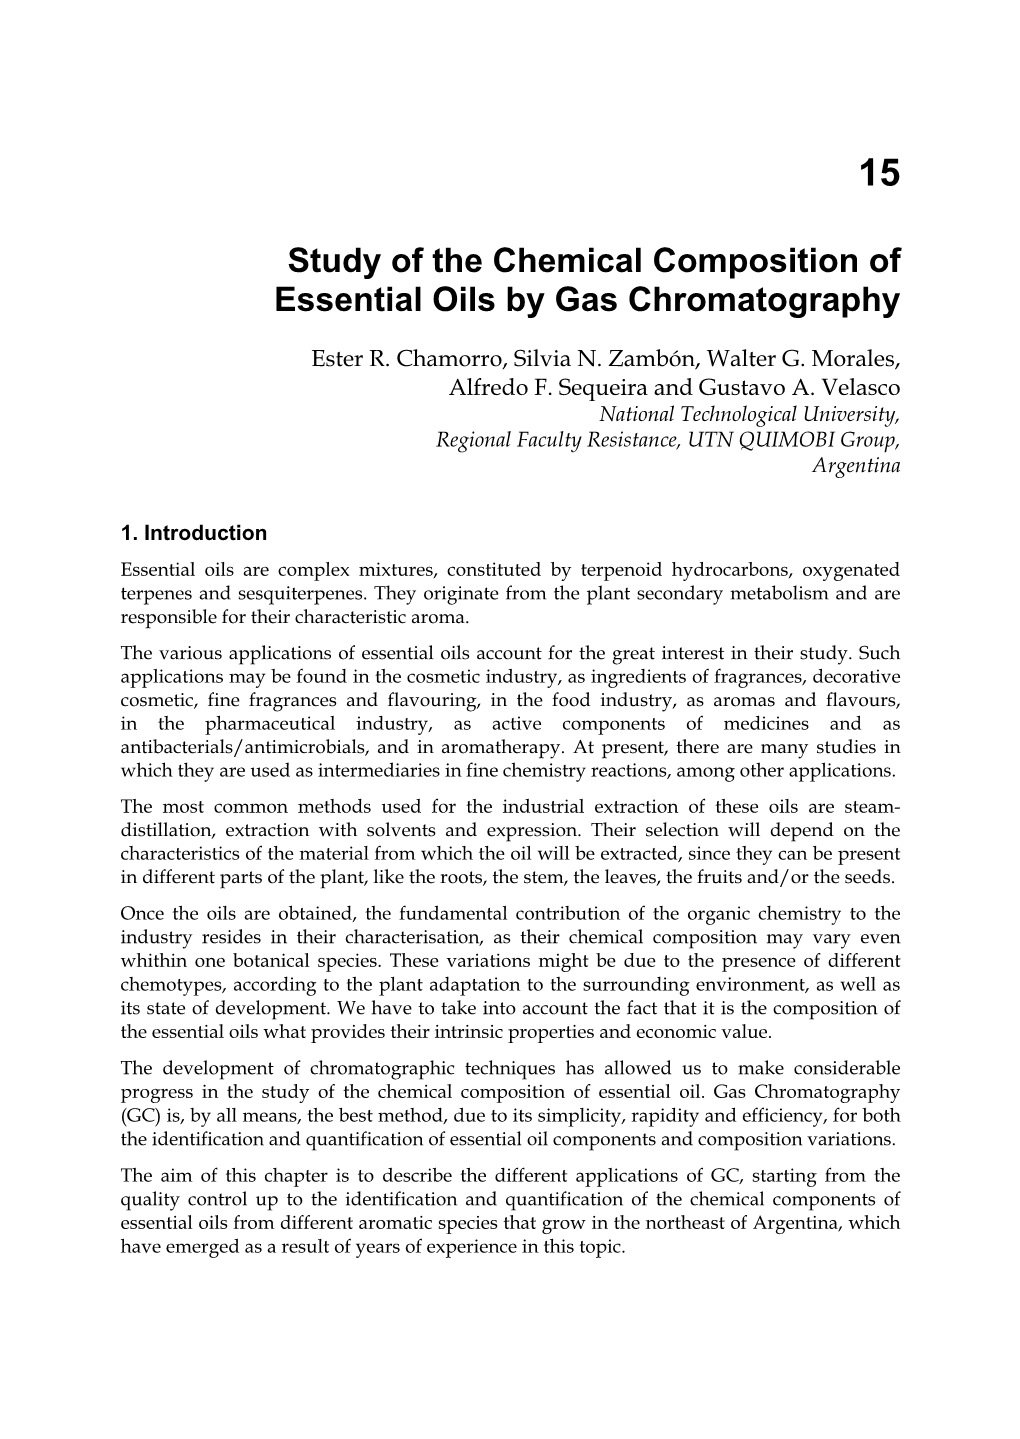 Study of the Chemical Composition of Essential Oils by Gas Chromatography